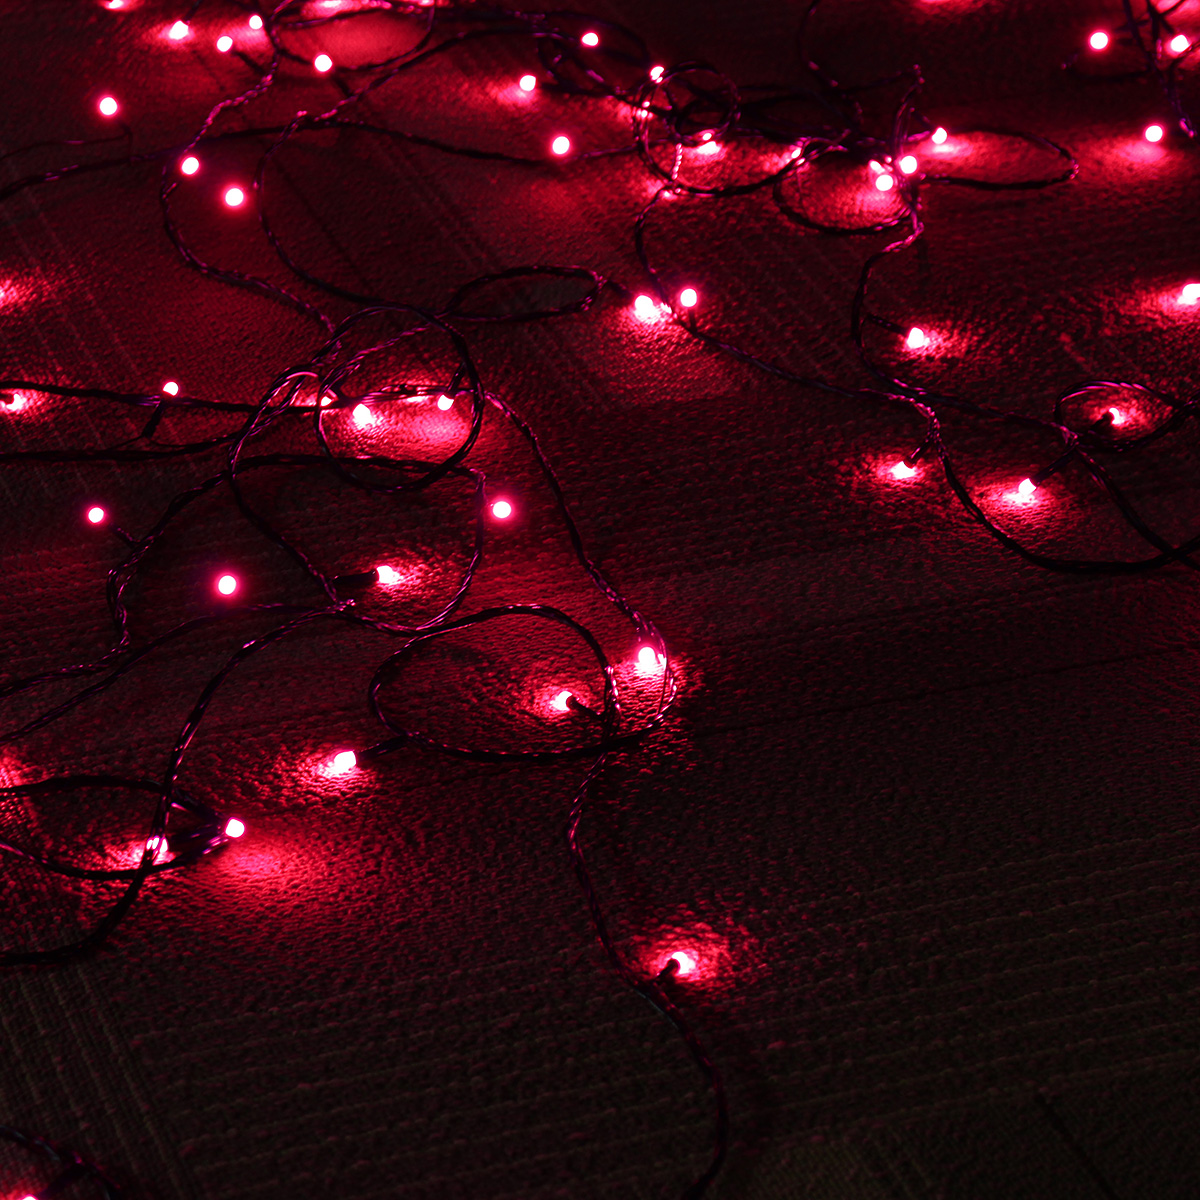 50M-220V-EU-Plug-8-Modes-Red-Pink-LED-Fairy-String-Light-Holiday-Lamp-for-Party-Festival-with-Contro-1630290-9